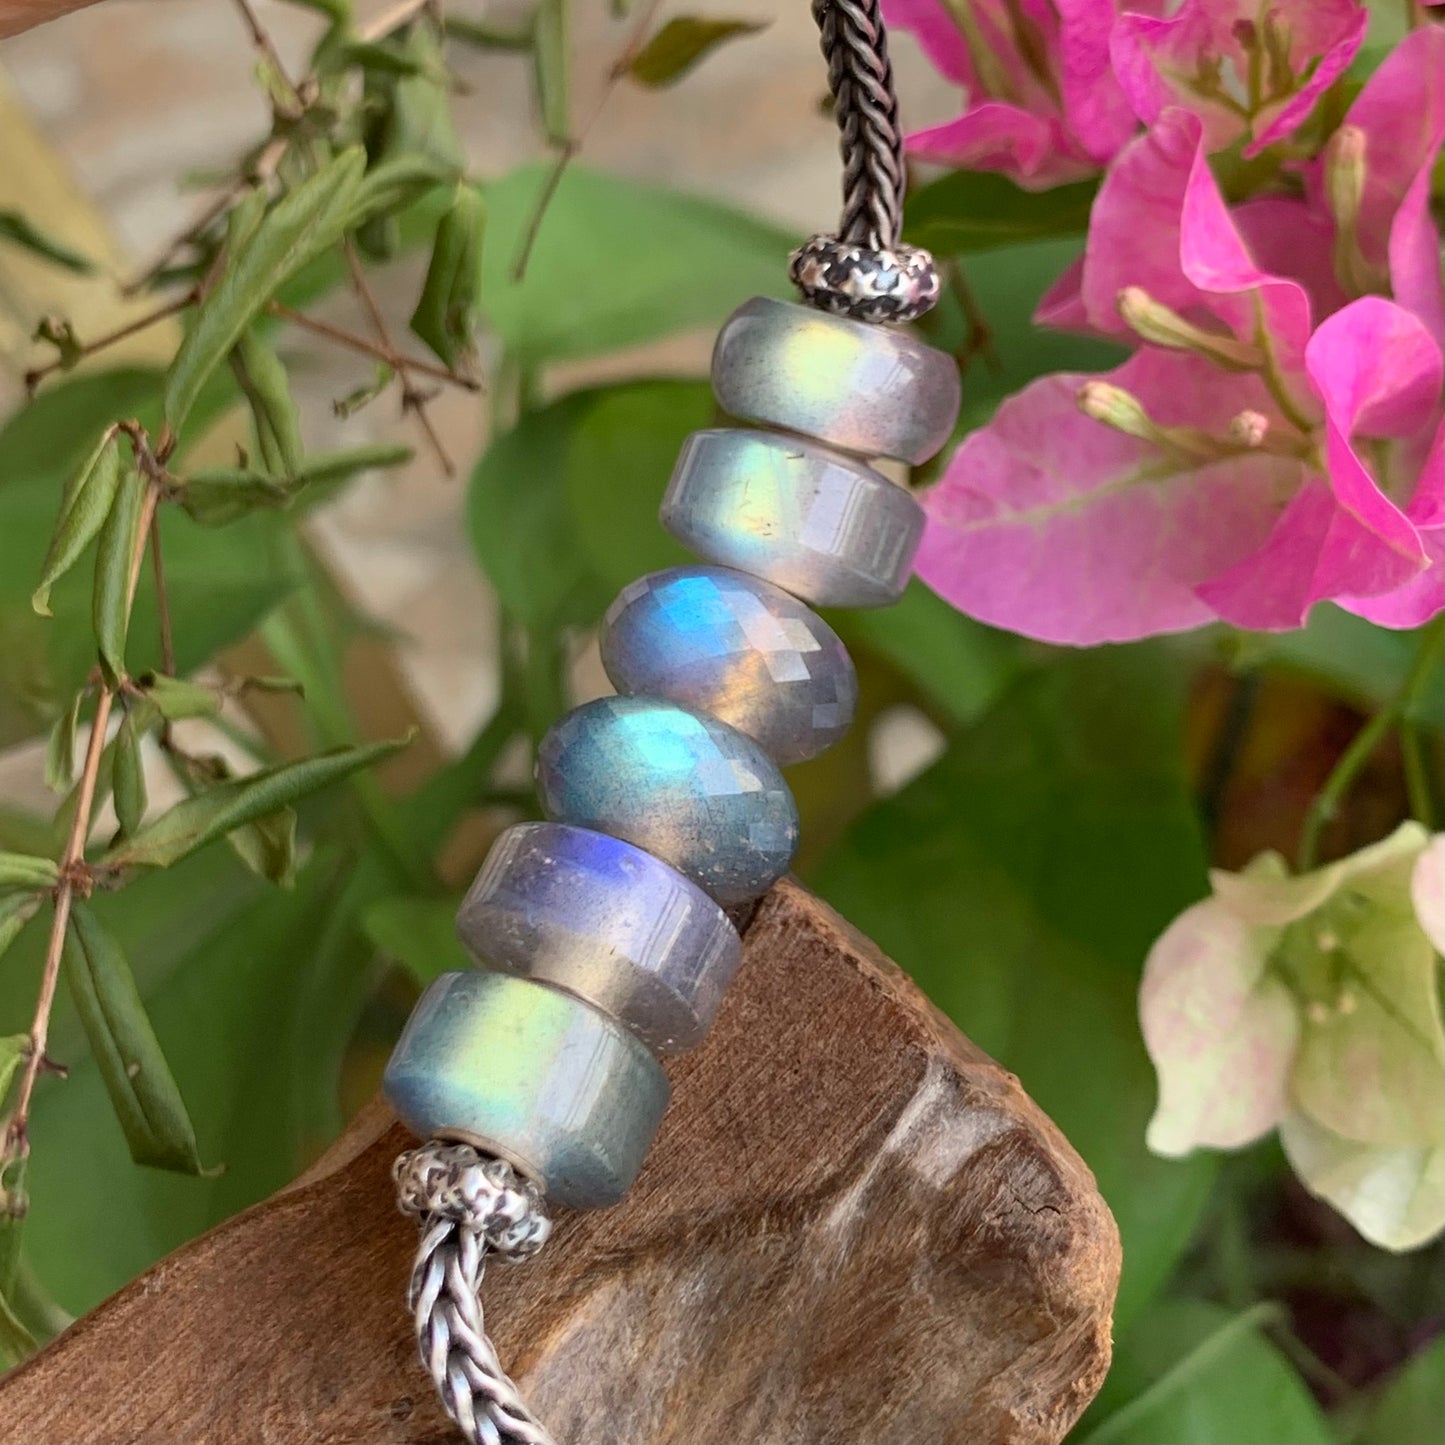 Charming Faceted Labradorite Beads and Smooth Wheel Shaped Labradorite Beads with Silver Core